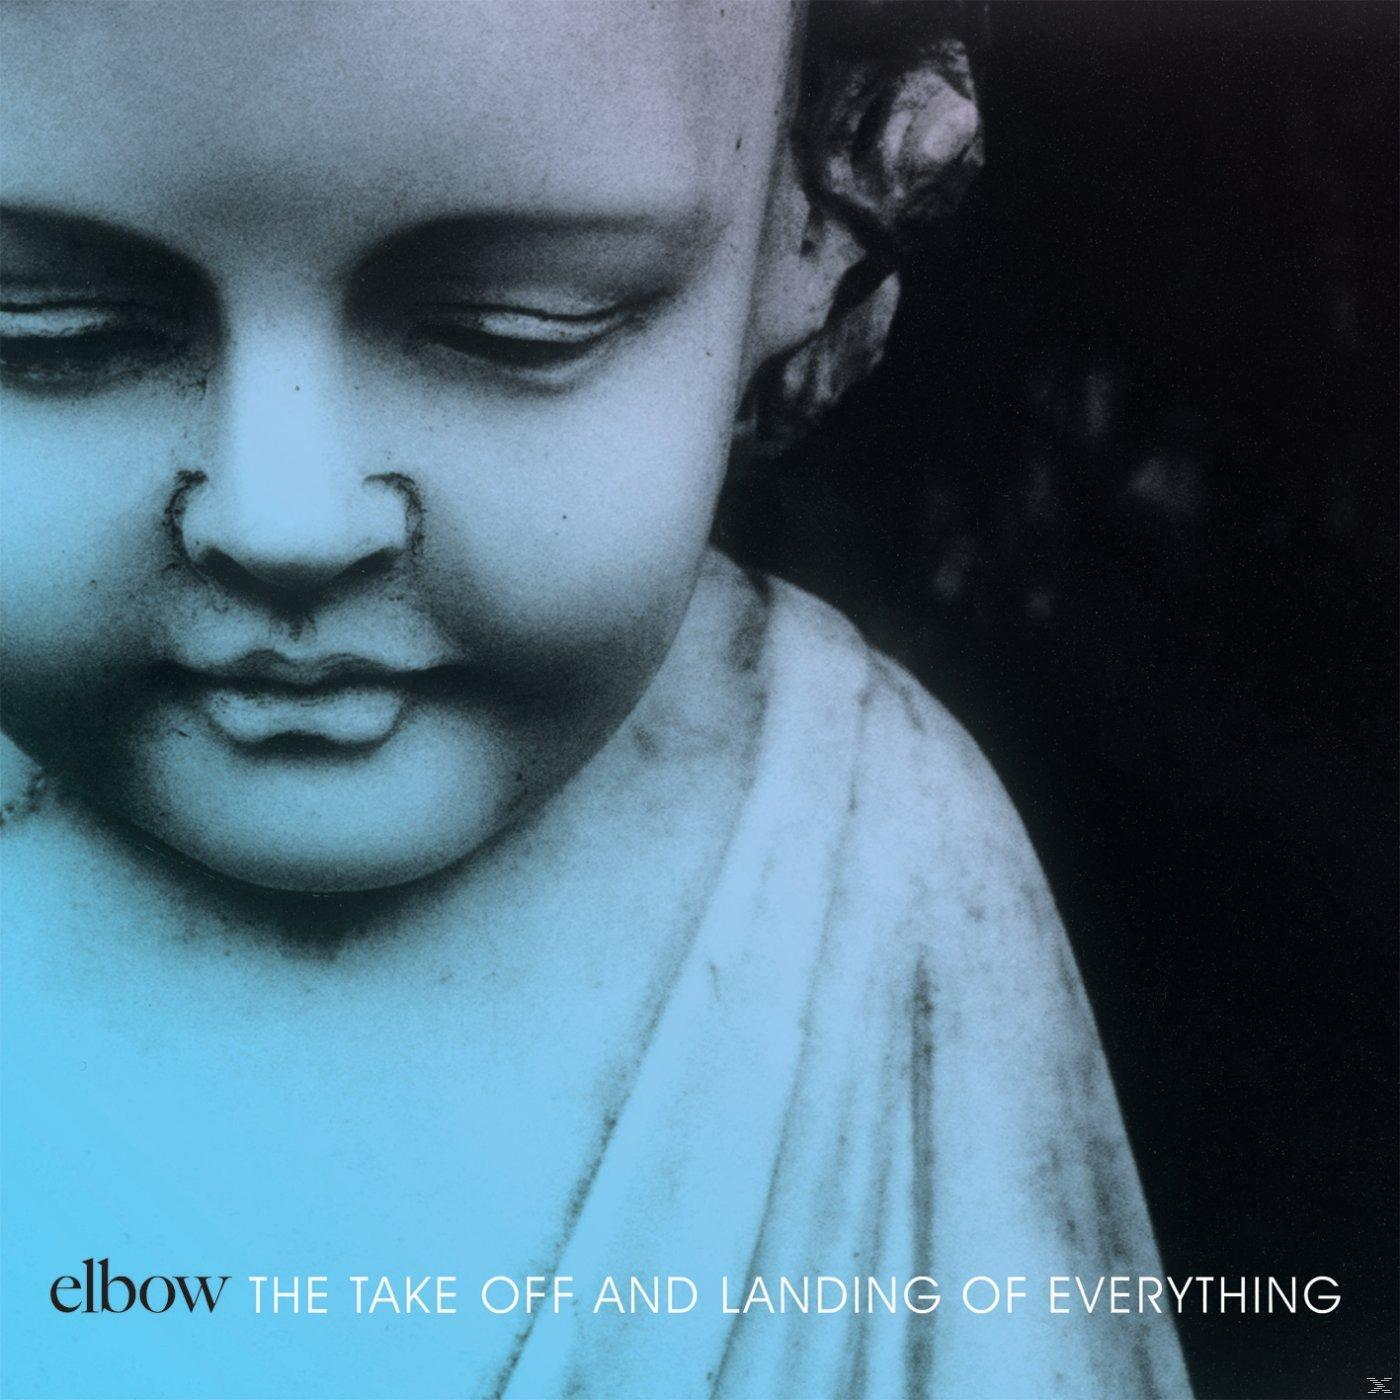 Elbow - The Take And Everything Of Landing - (CD) Off